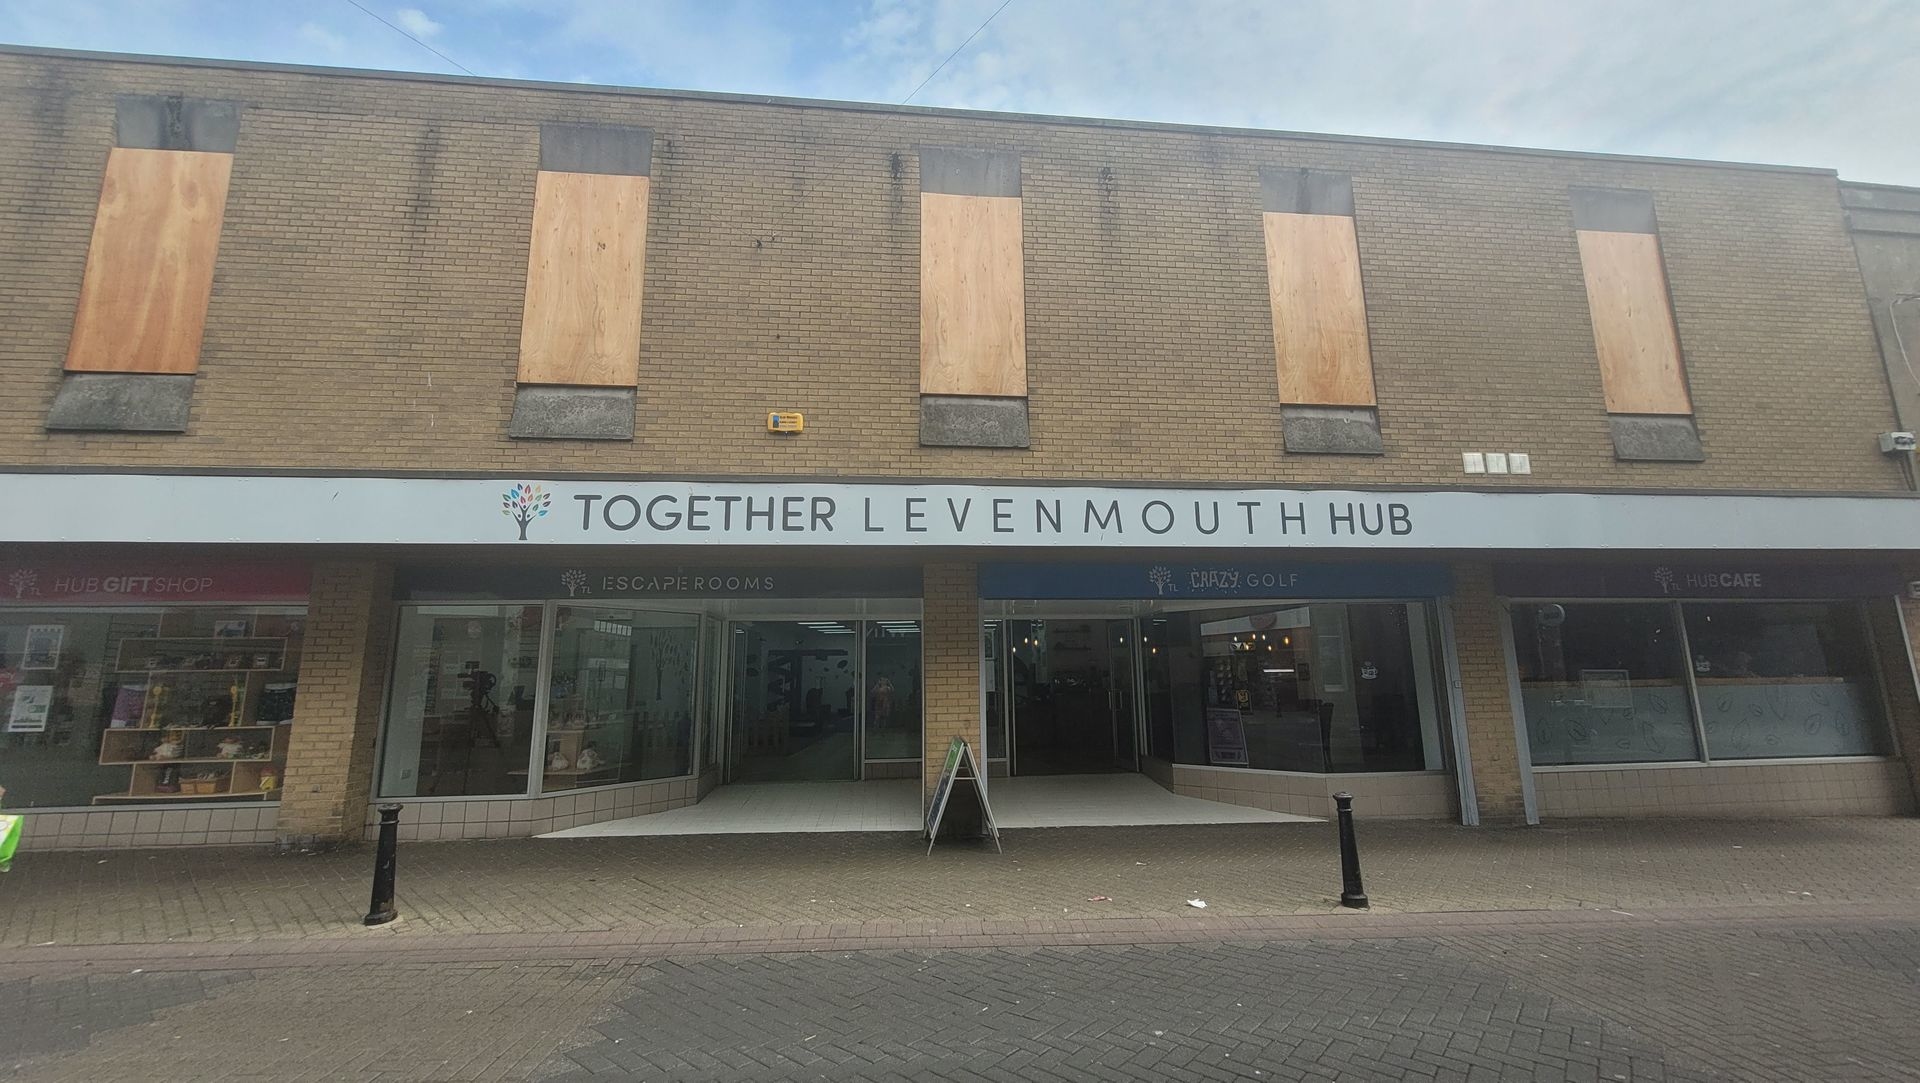 A host of activities take place in the Together Levenmouth Hub.